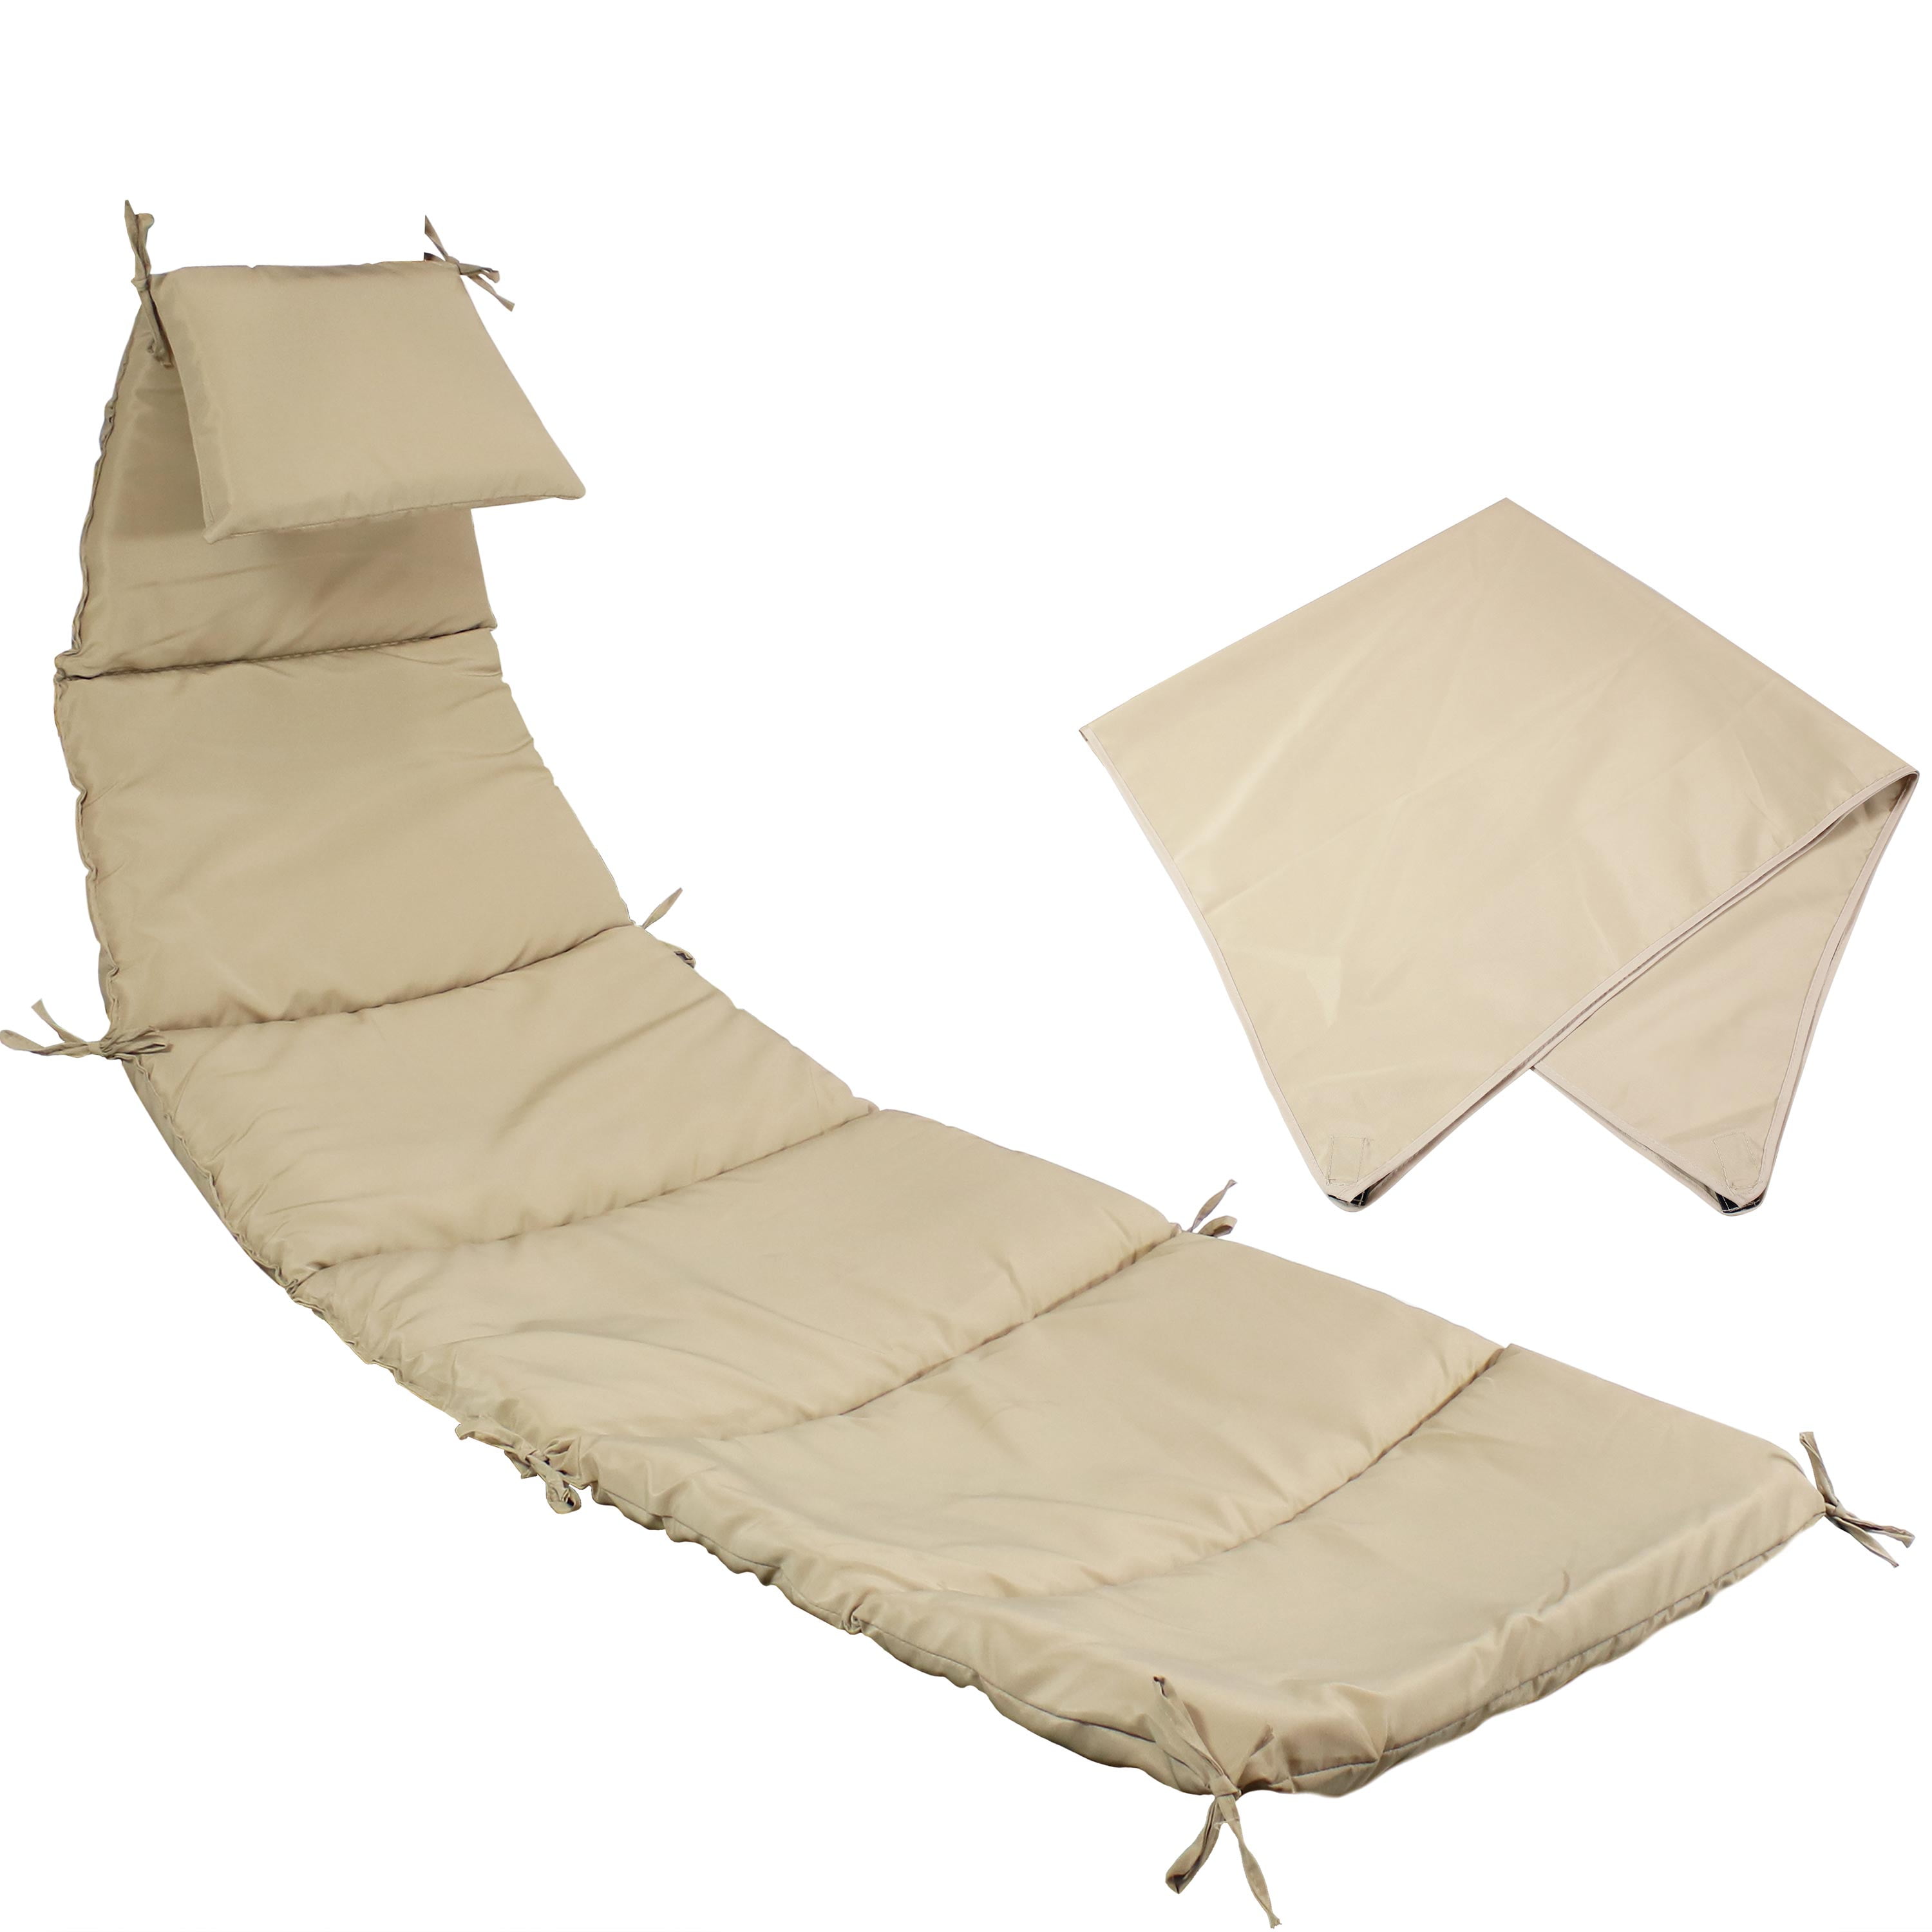 Sunnydaze Hanging Lounge Chair Replacement Cushion and Umbrella